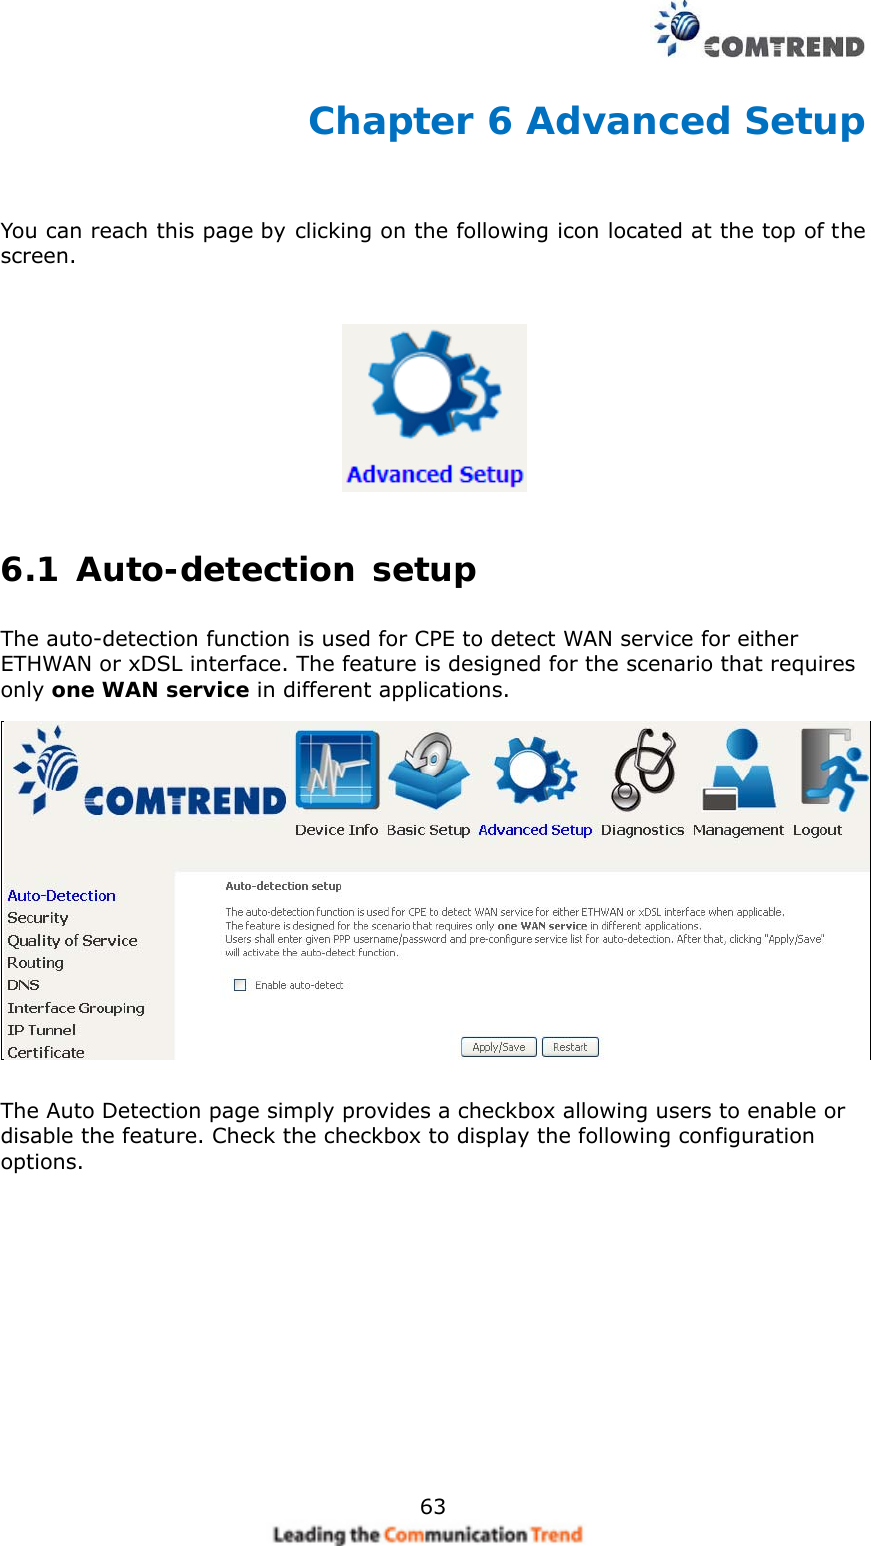    63Chapter 6 Advanced Setup  You can reach this page by clicking on the following icon located at the top of the screen.  6.1 Auto-detection setup The auto-detection function is used for CPE to detect WAN service for either ETHWAN or xDSL interface. The feature is designed for the scenario that requires only one WAN service in different applications.    The Auto Detection page simply provides a checkbox allowing users to enable or disable the feature. Check the checkbox to display the following configuration options.             